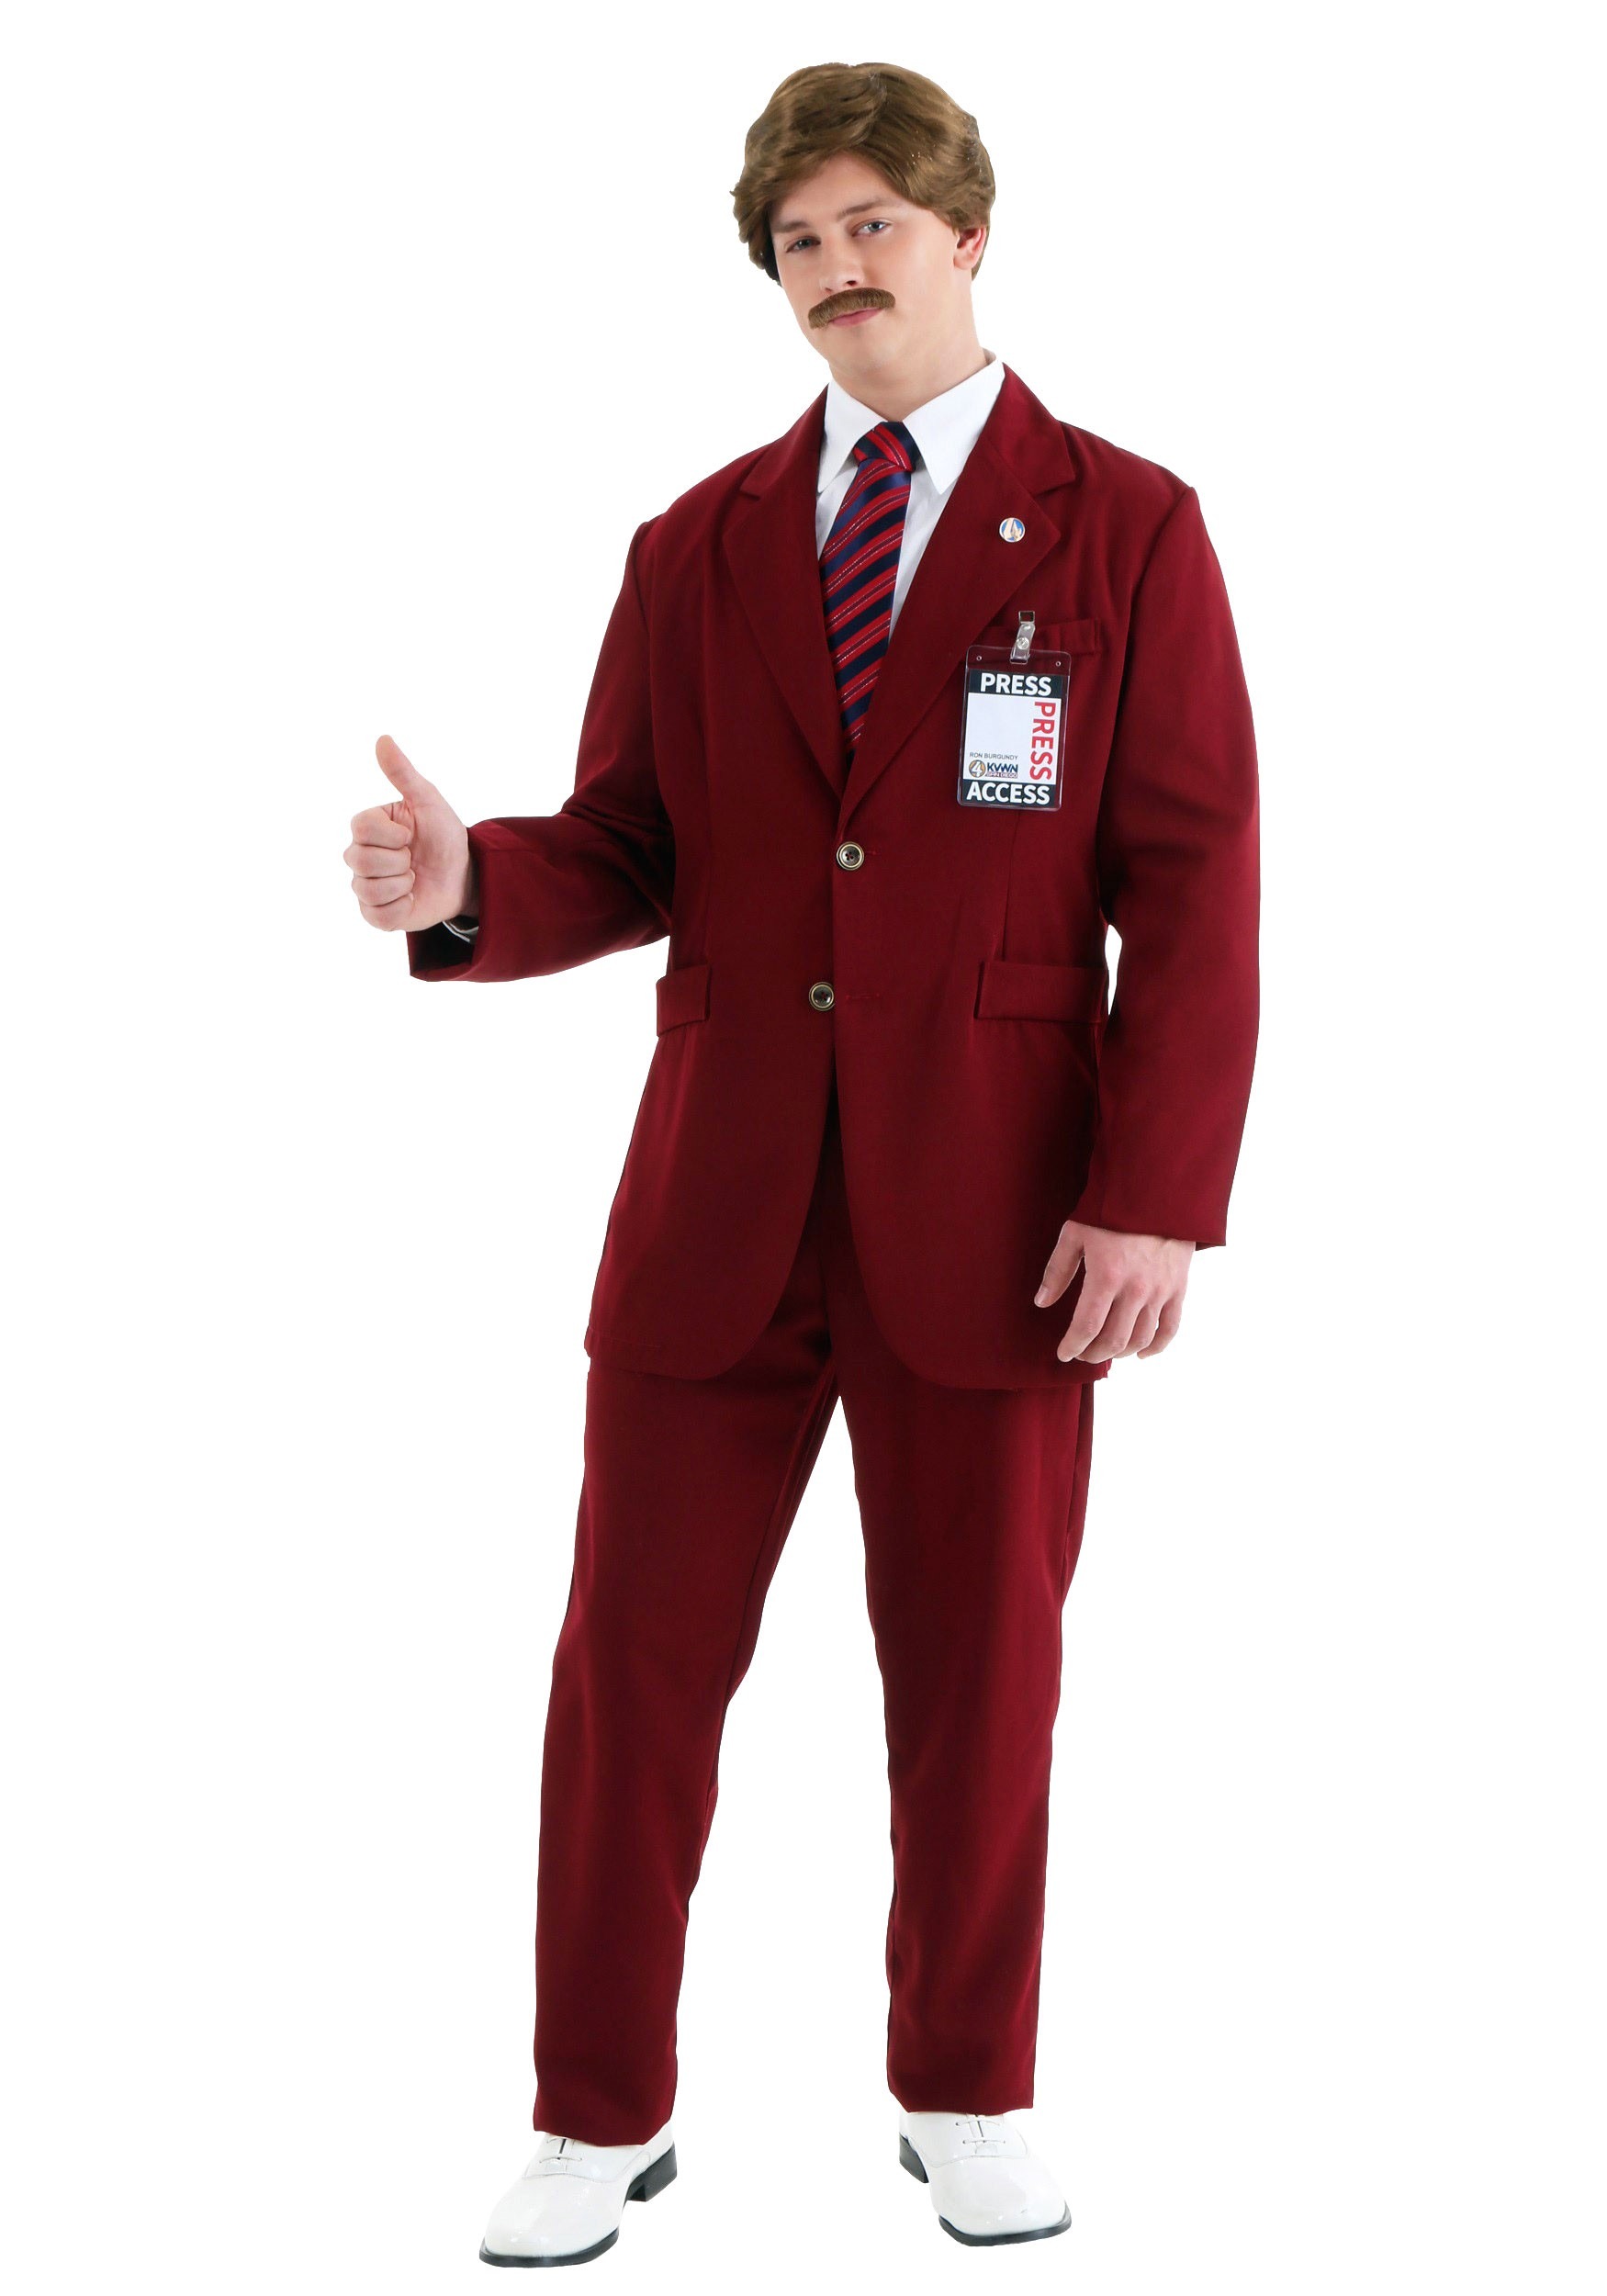 Photos - Fancy Dress Deluxe FUN Costumes  Ron Burgundy Costume Suit Red FUN2275AD 